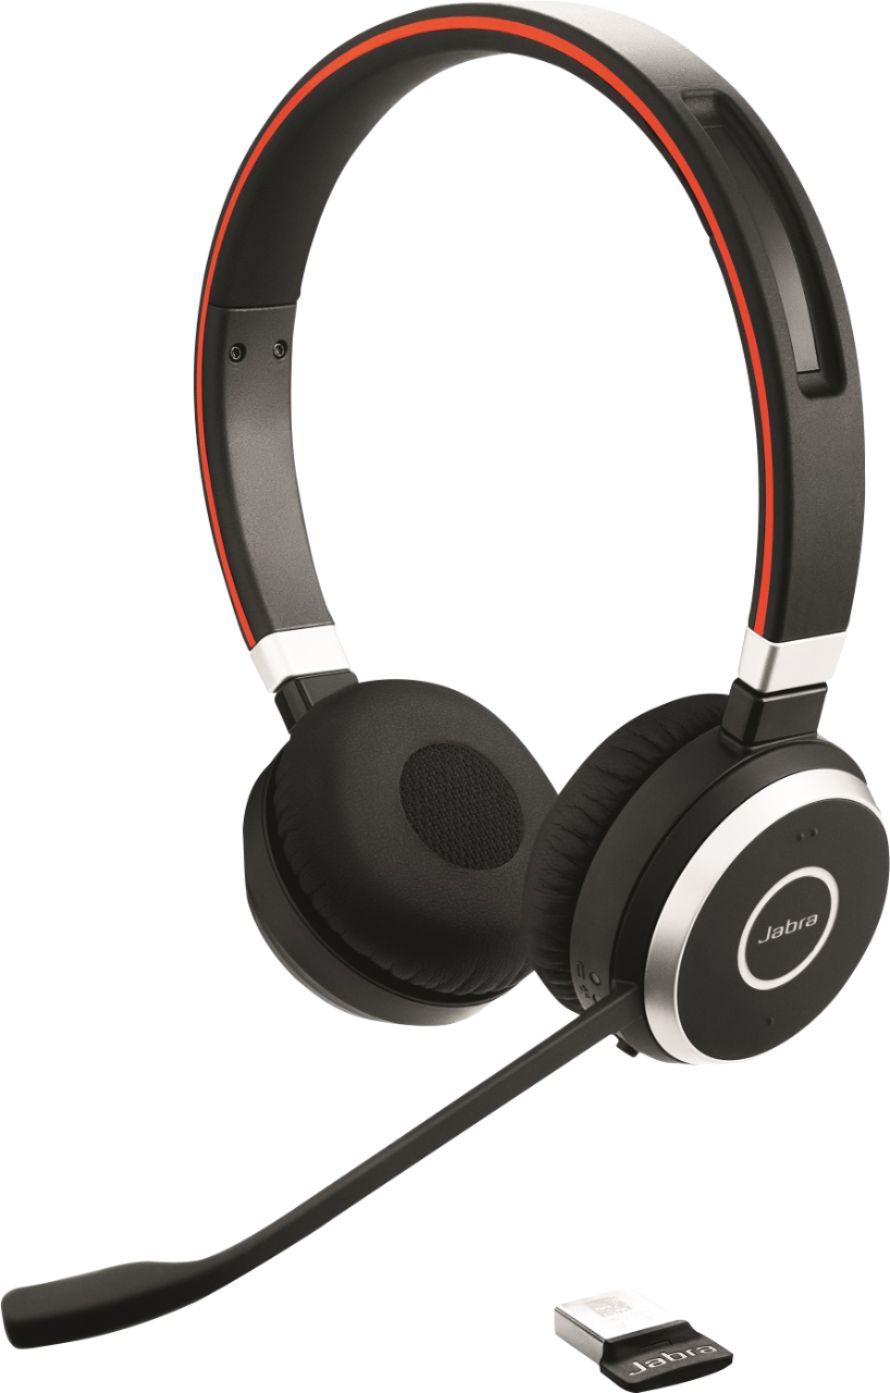 Jabra's New Evolve2 75 Wireless Headset Is The Best ANC Model On The Market